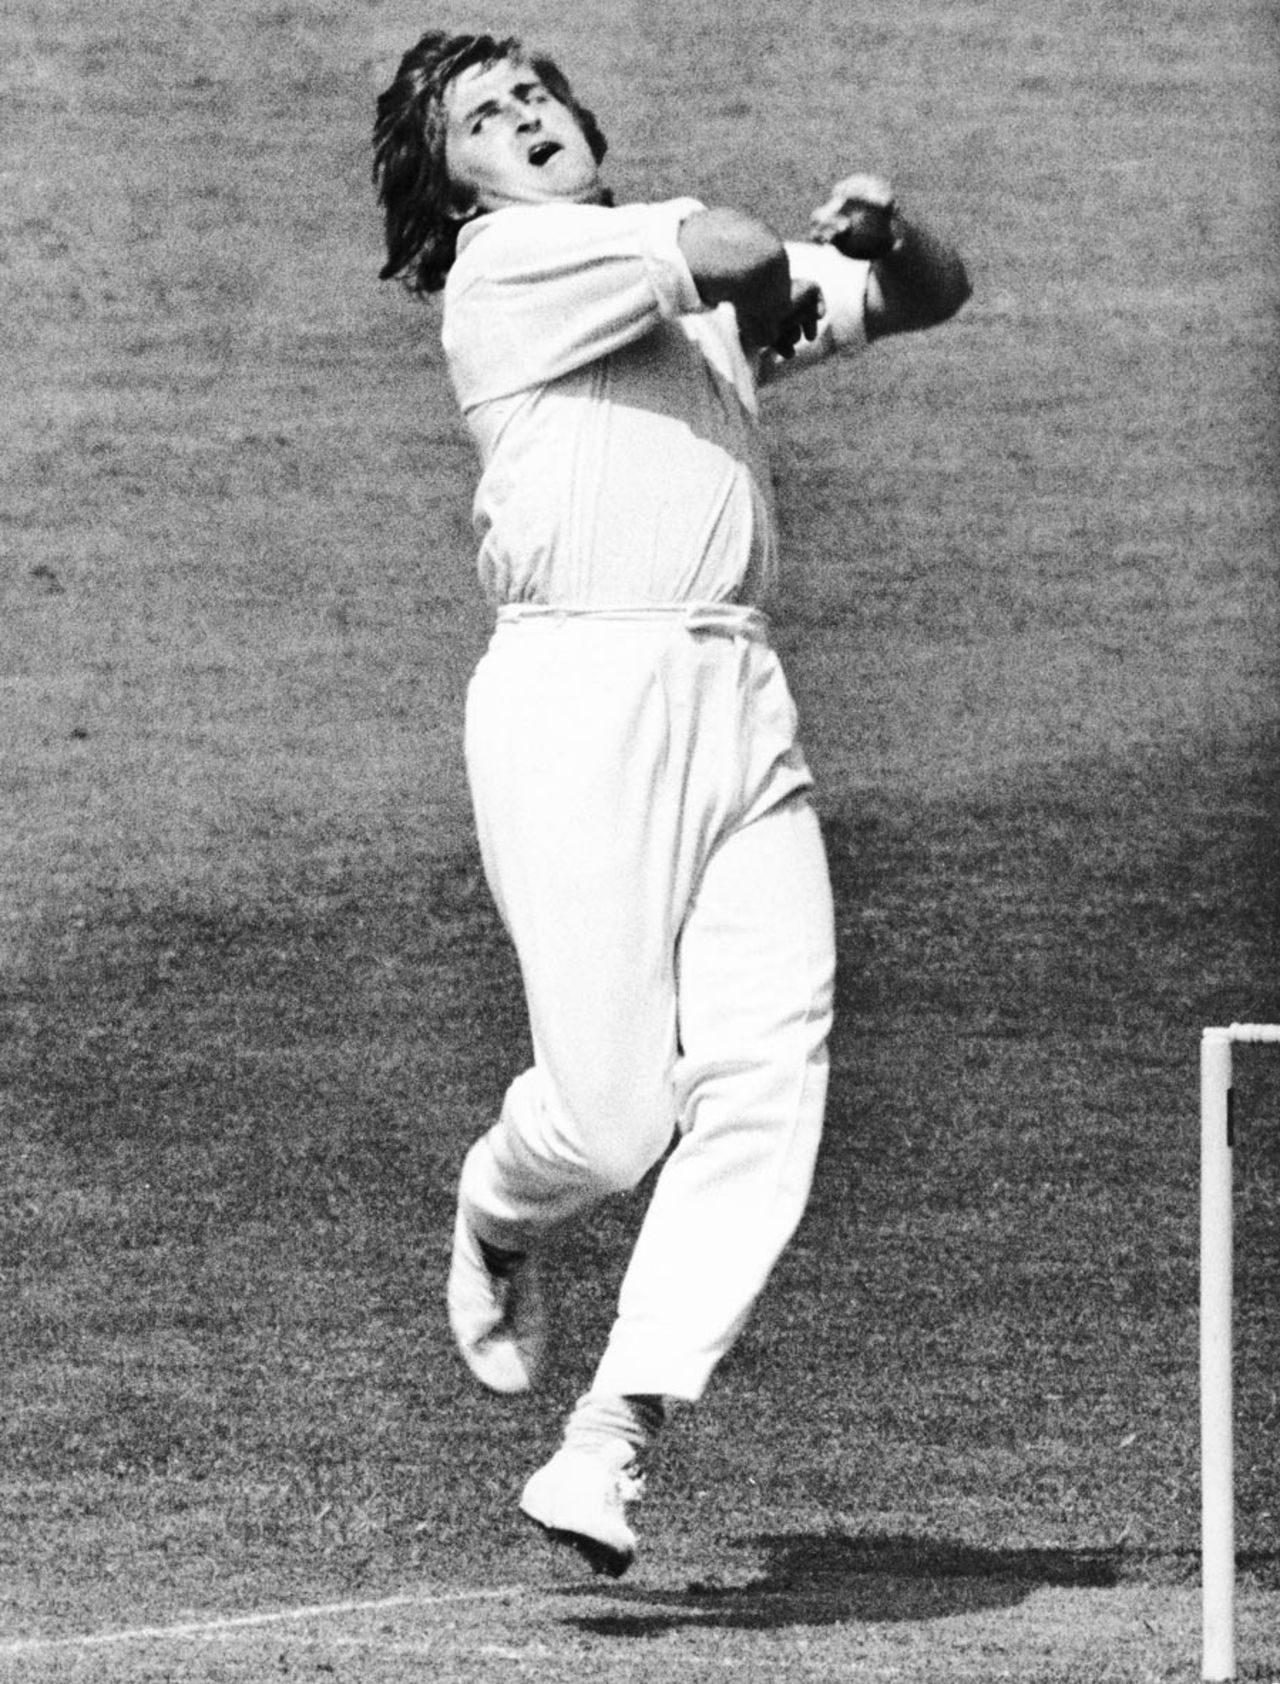 Gary Gilmour bowling during the World Cup, The Oval, June 7, 1975